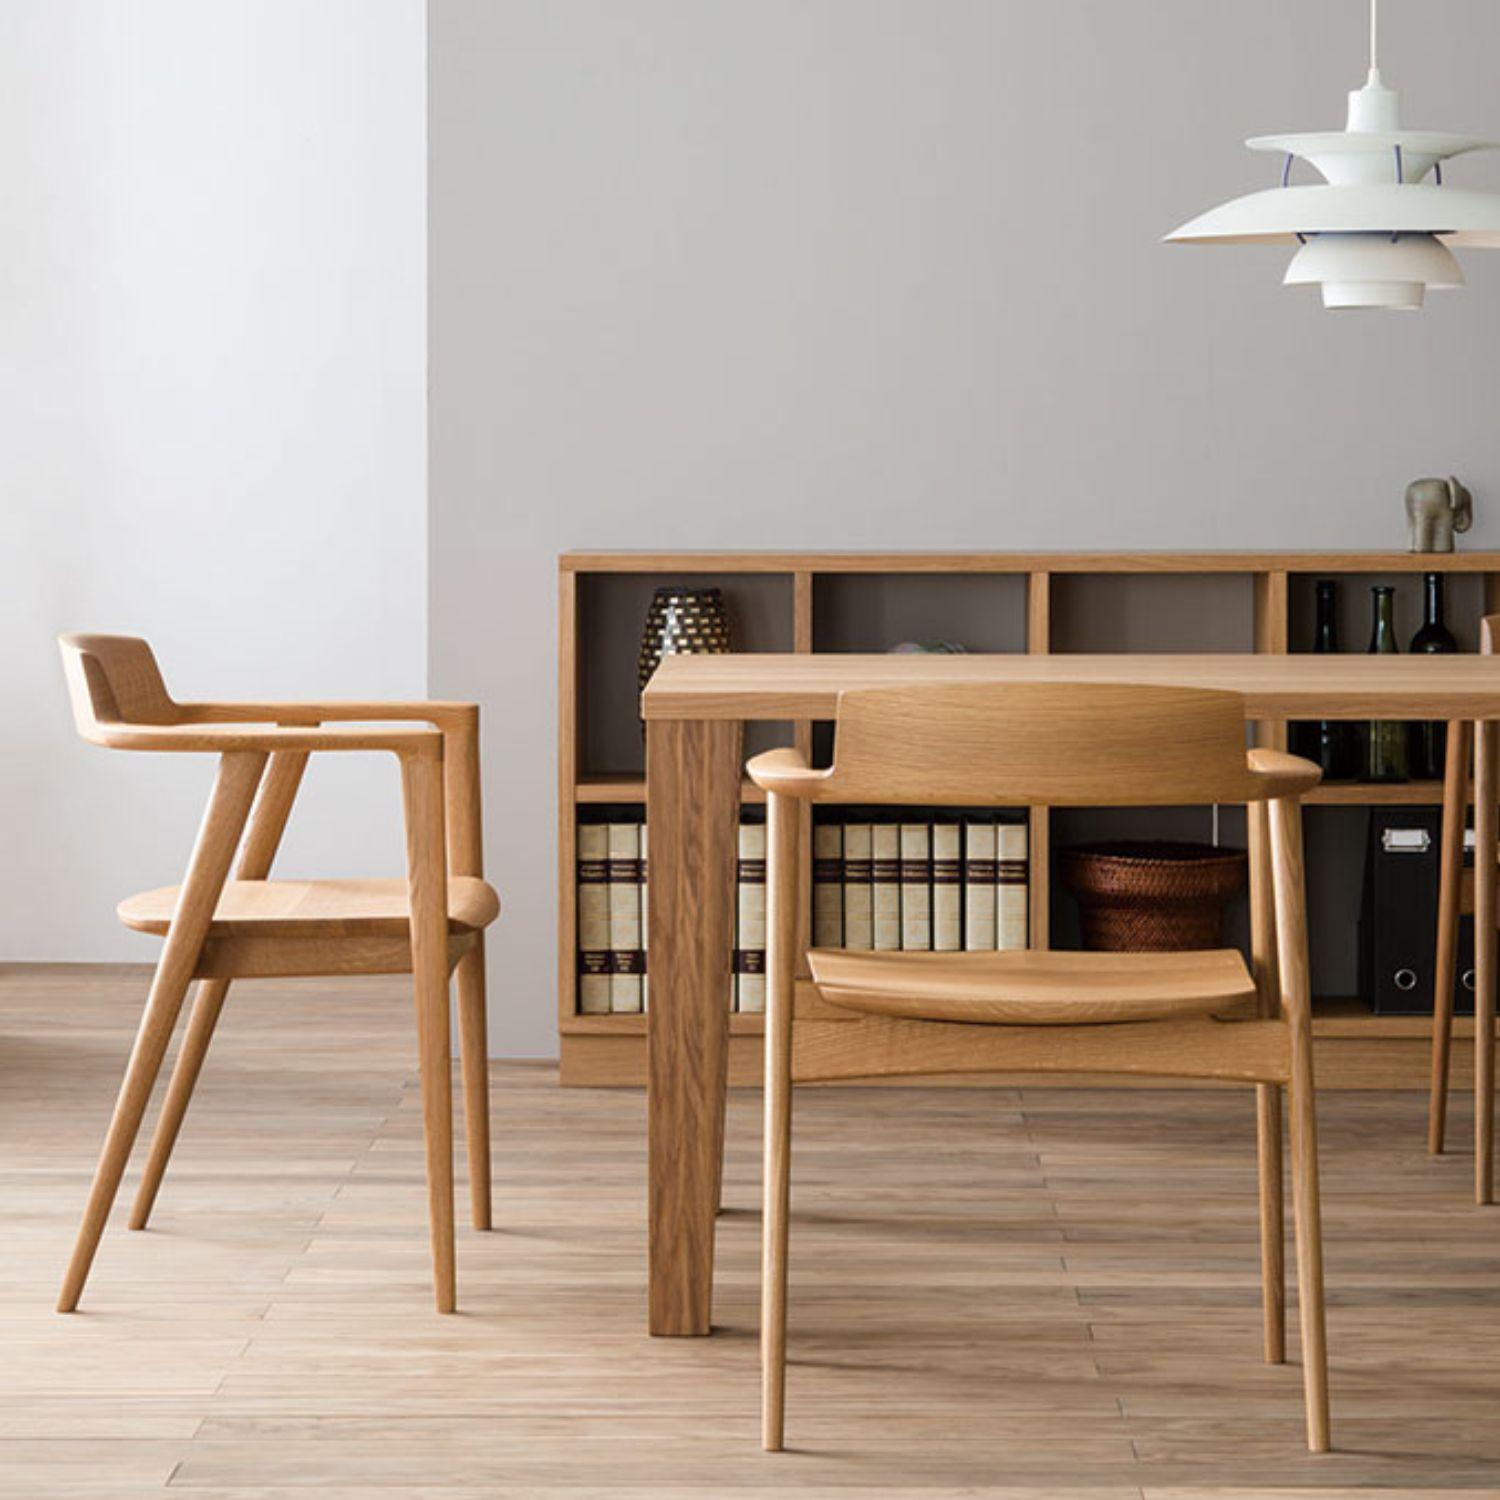 Motomi Kawakami 'Seoto KD221' dining armchair in beech for Hida.

For centuries, famed Hida artisans in Gifu prefecture have played a role in Japan's woodworking culture, crafting iconic bentwood furniture from sustainable local forests. Established